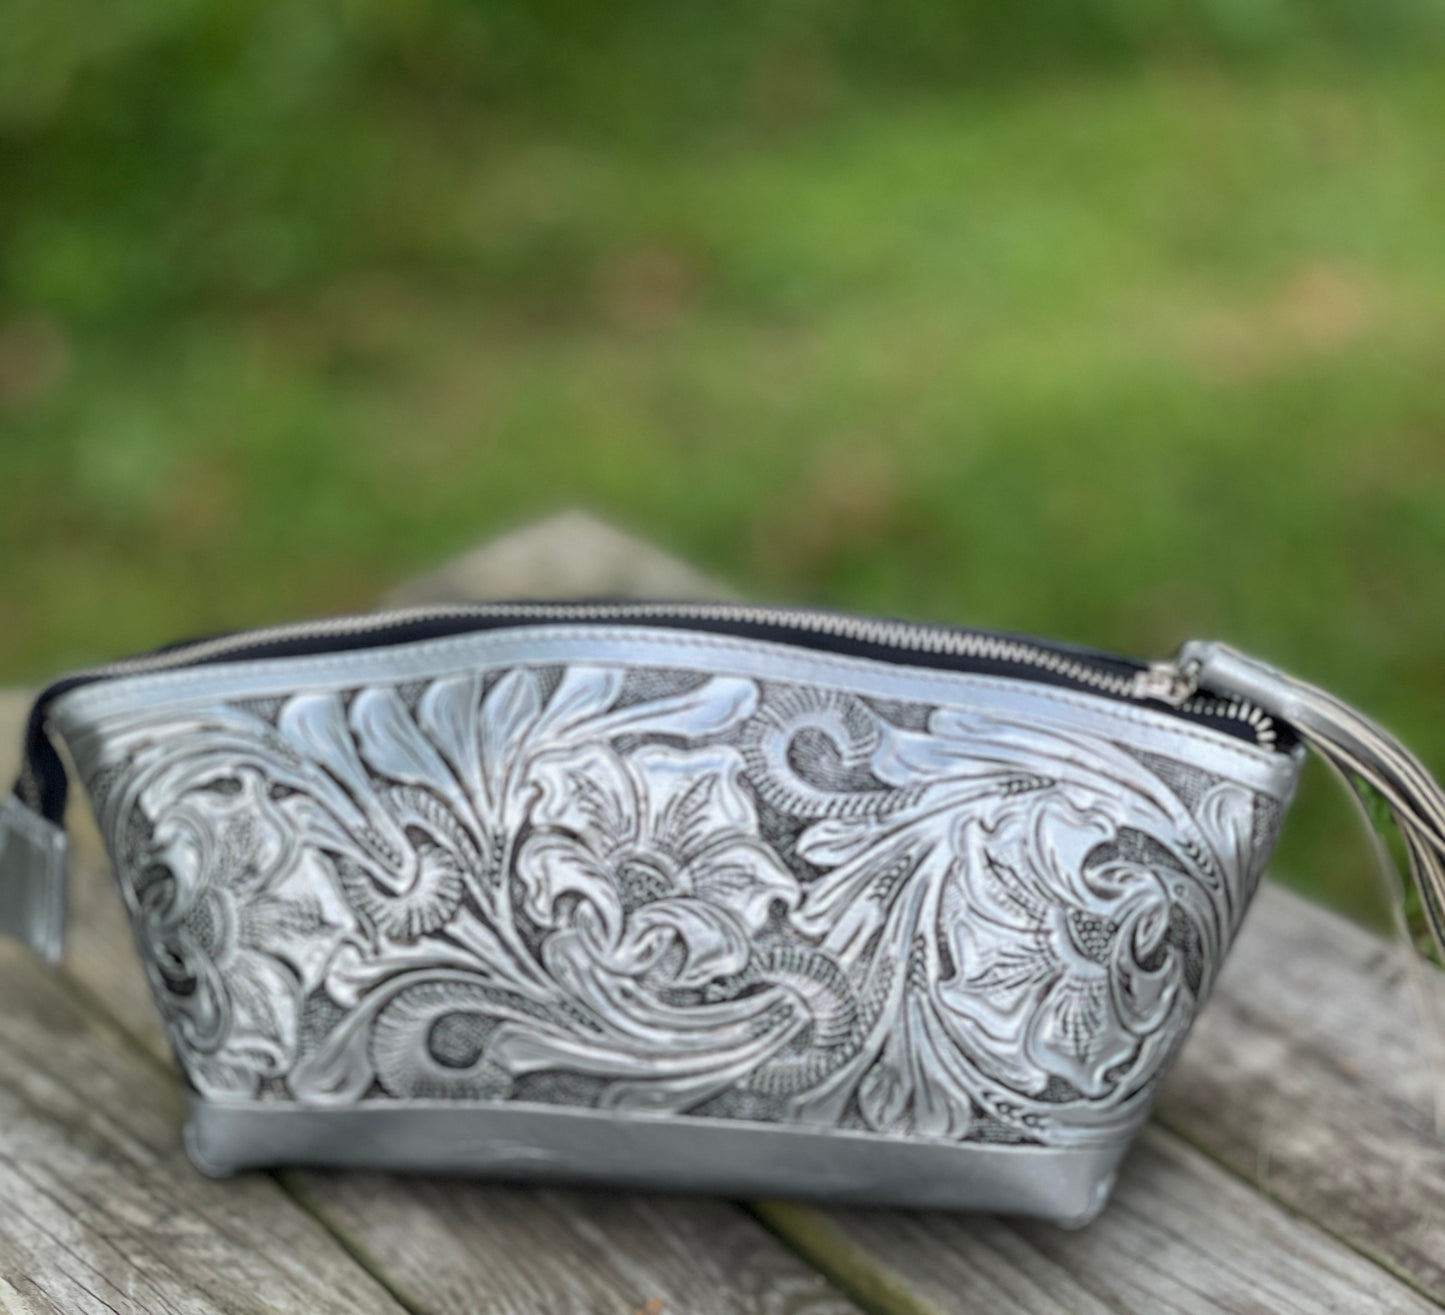 Hand-Tooled Leather COSMETIC BAG - ALLE Handbags